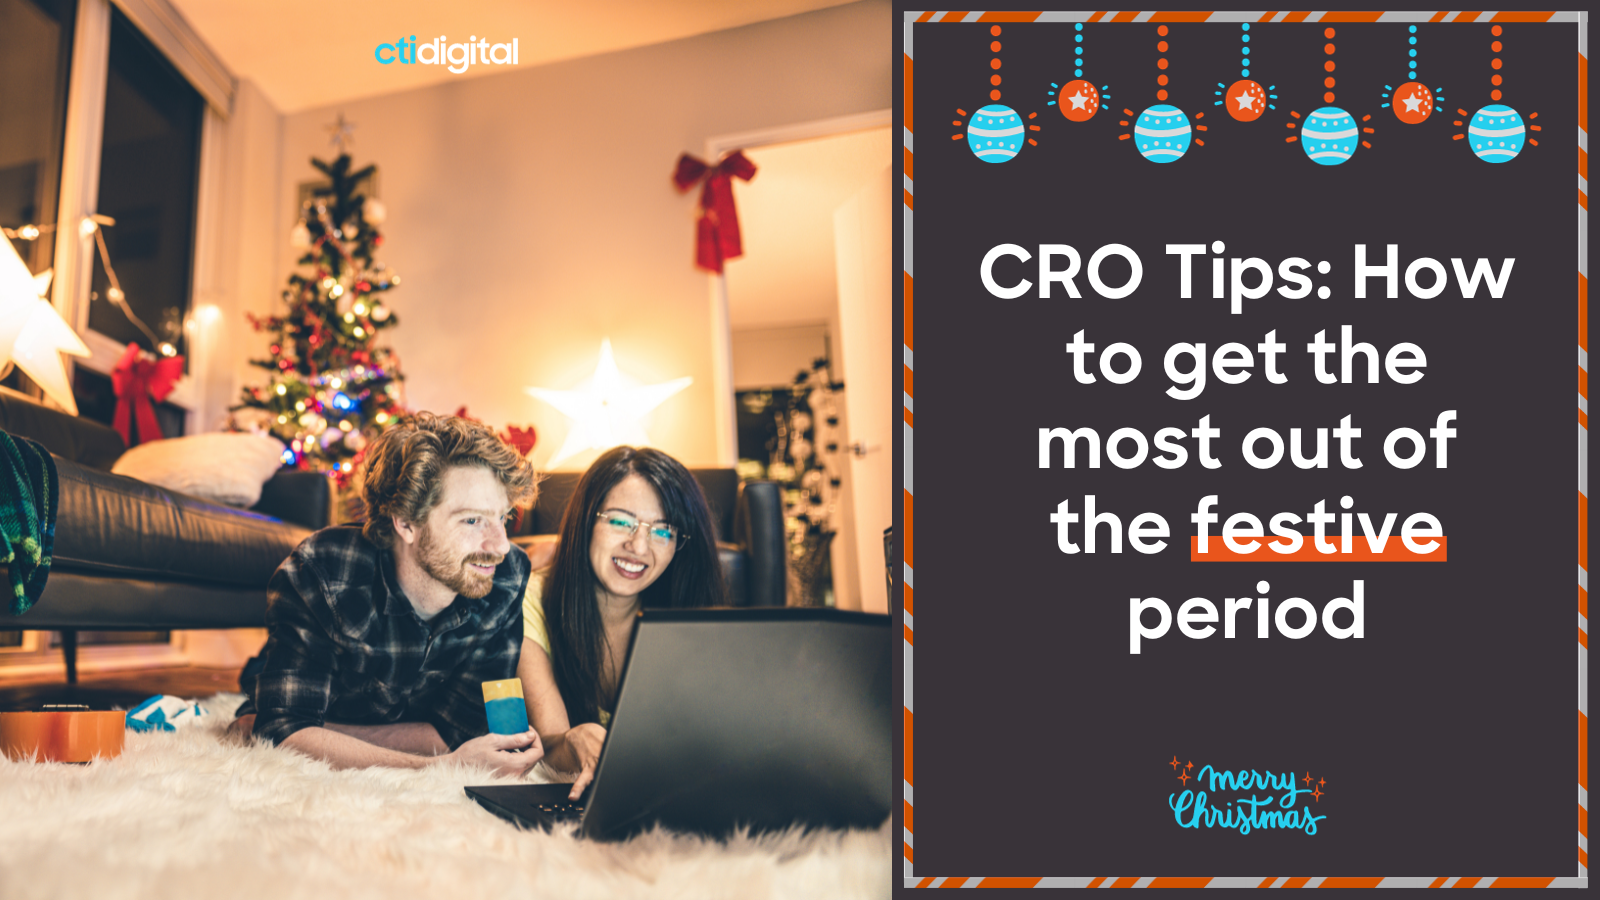 CRO tips: How to get the most out of the festive period